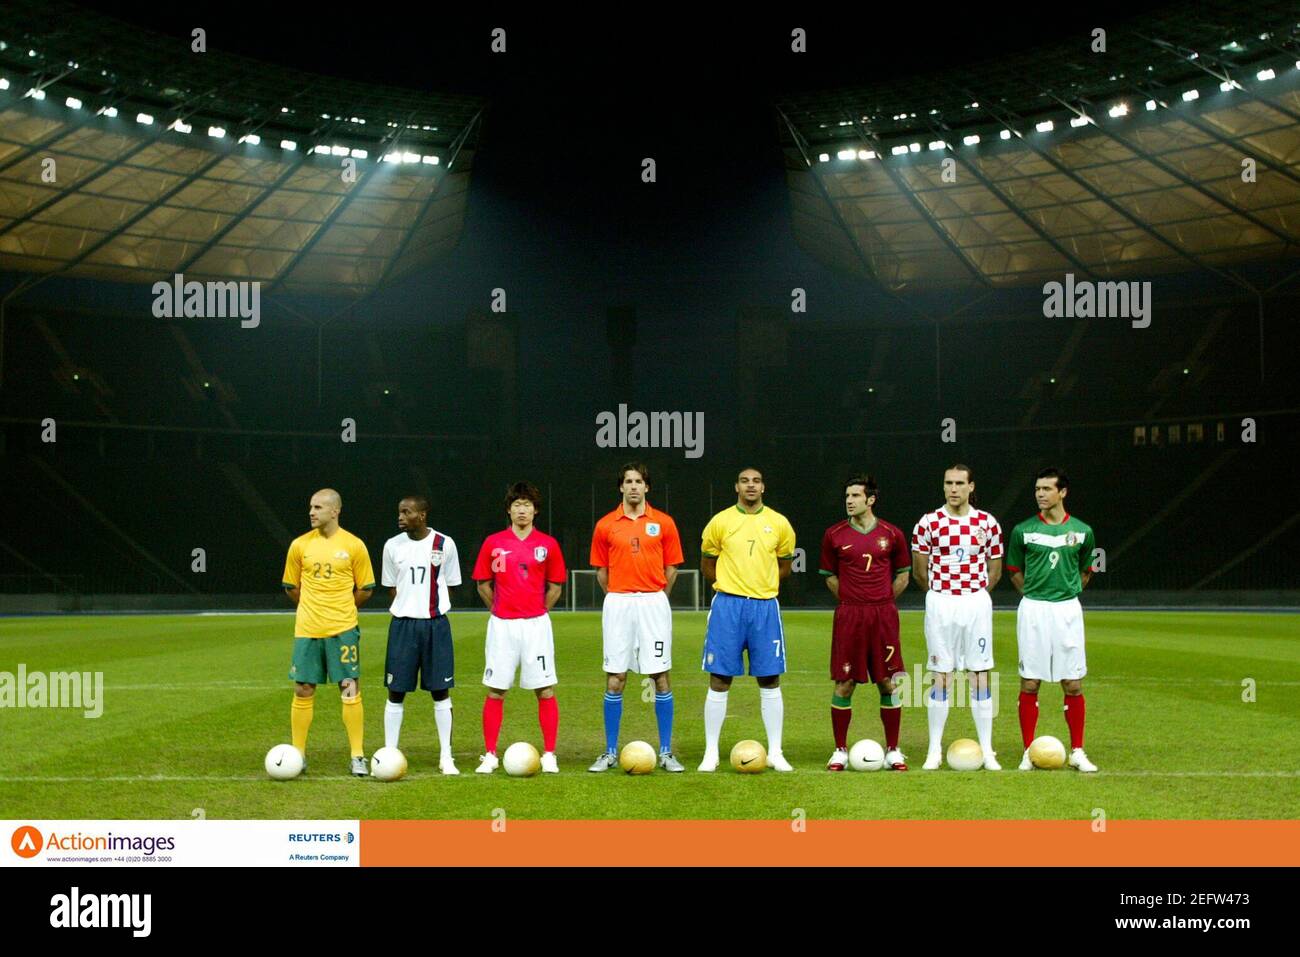 Football - Nike - 2006 World Cup Official Kit Launch for Brazil, Portugal, Australia, Holland, Korea, Mexico, Croatia & USA - Olympic Stadium, Berlin, Germany - 13/2/06  (L-R) Australia's Marco Bresciano, Damarcus Beasley of the U.S., Korea's JS Park, Holland's Ruud van Nistelrooy, Brazil's Adriano, Portugal's Luis Figo, Croatia's Dado Prso and Mexico's Jared Borgetti pose with their kits for the FIFA World Cup 2006  Mandatory Credit: Action Images / Tobias Schwarz  Livepic Stock Photo